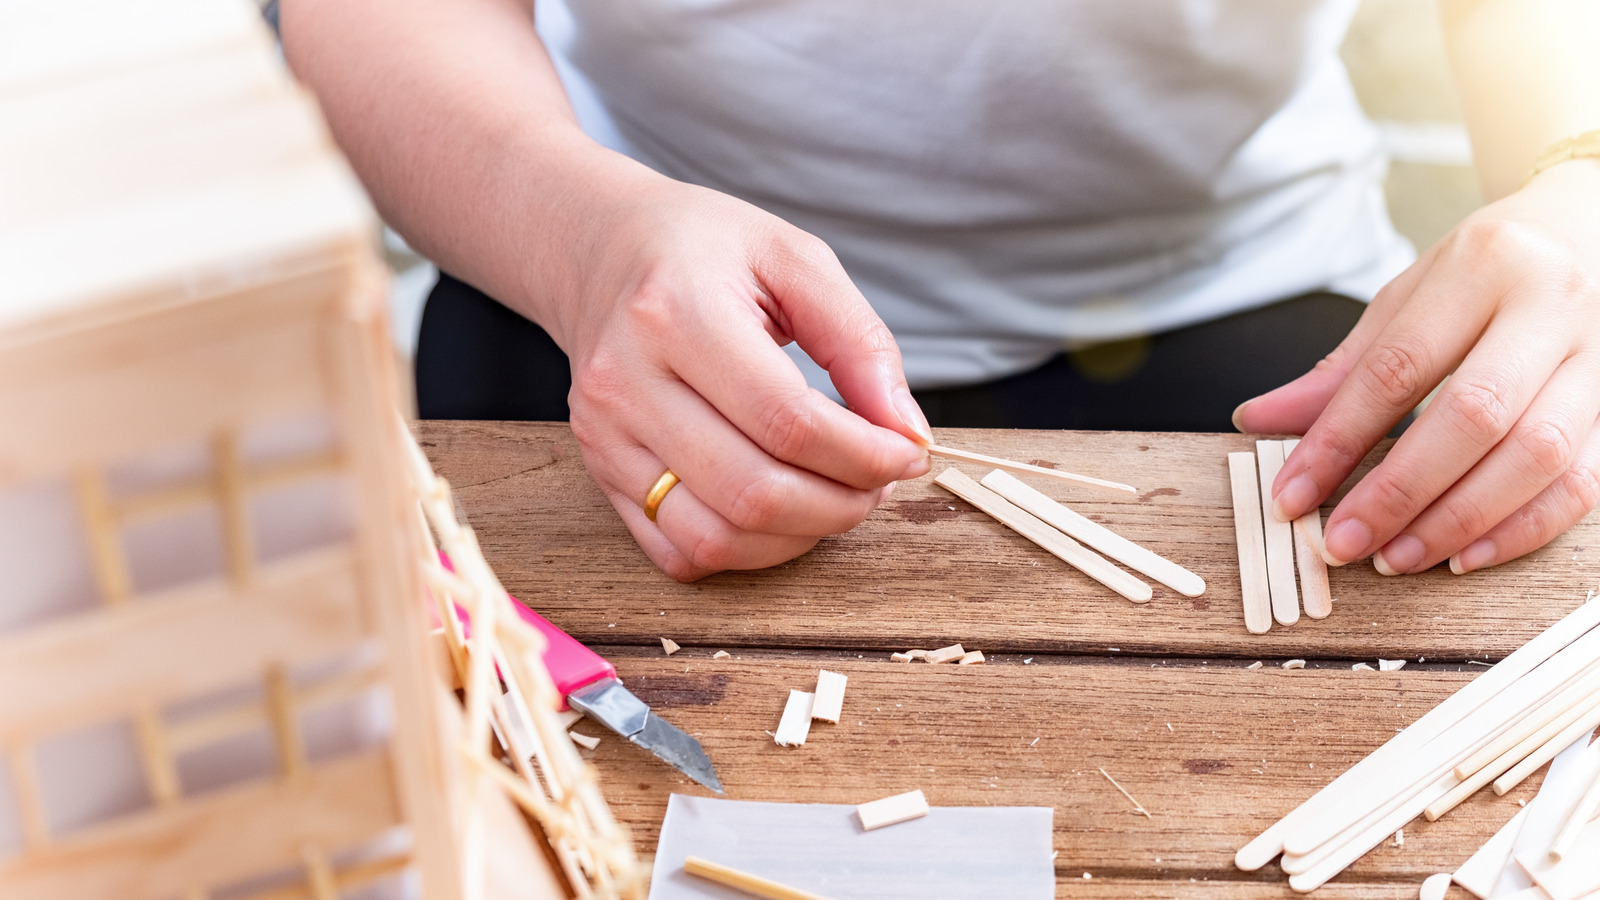 11 DIY Popsicle Stick Projects That Are Perfect For Around The House